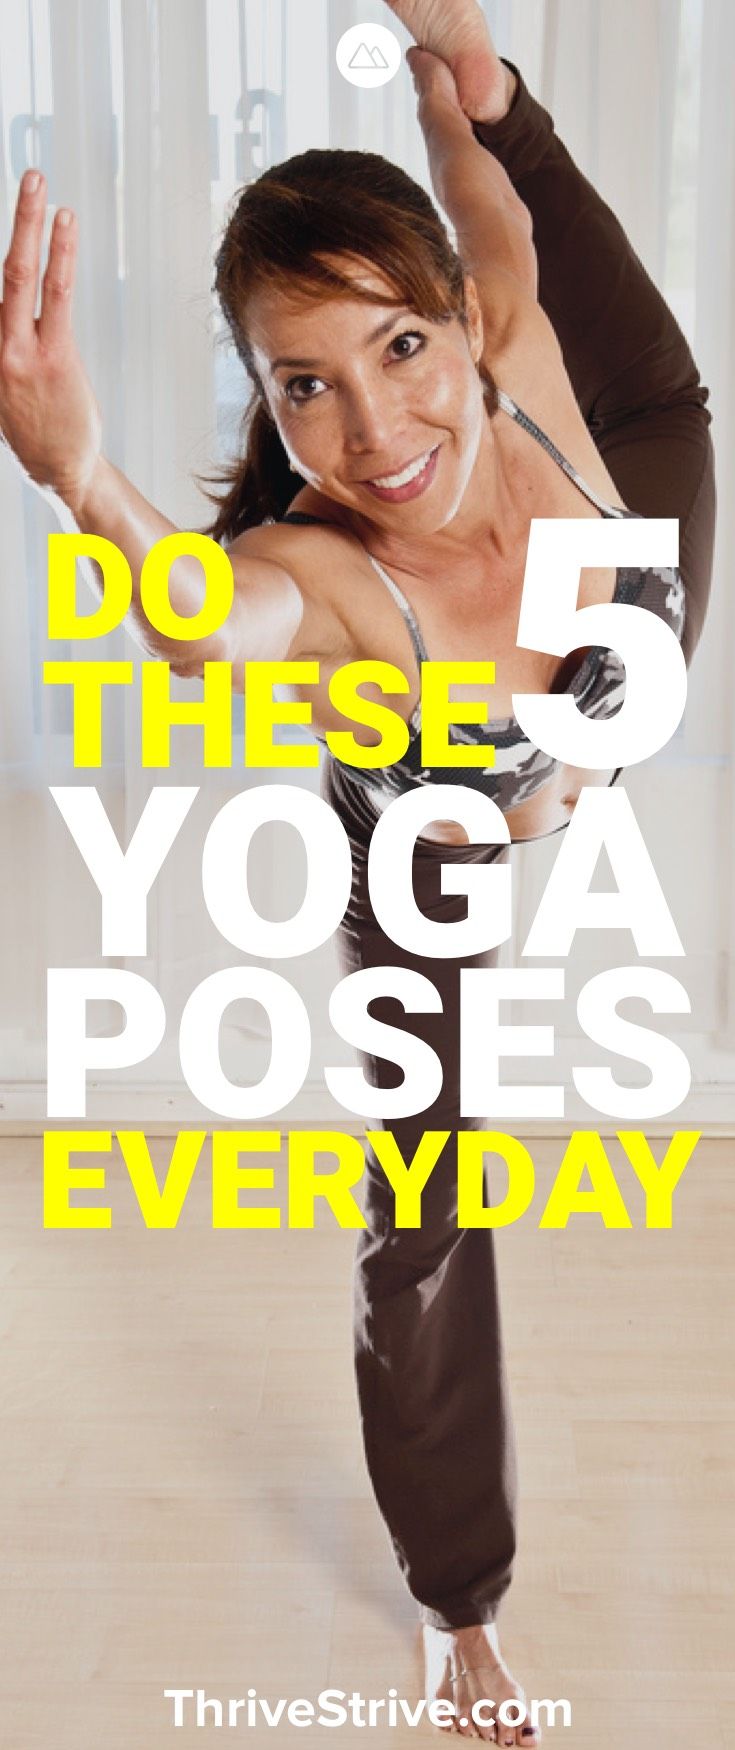 Ready to get started with yoga? Here are 5 yoga poses for beginners that you sho...